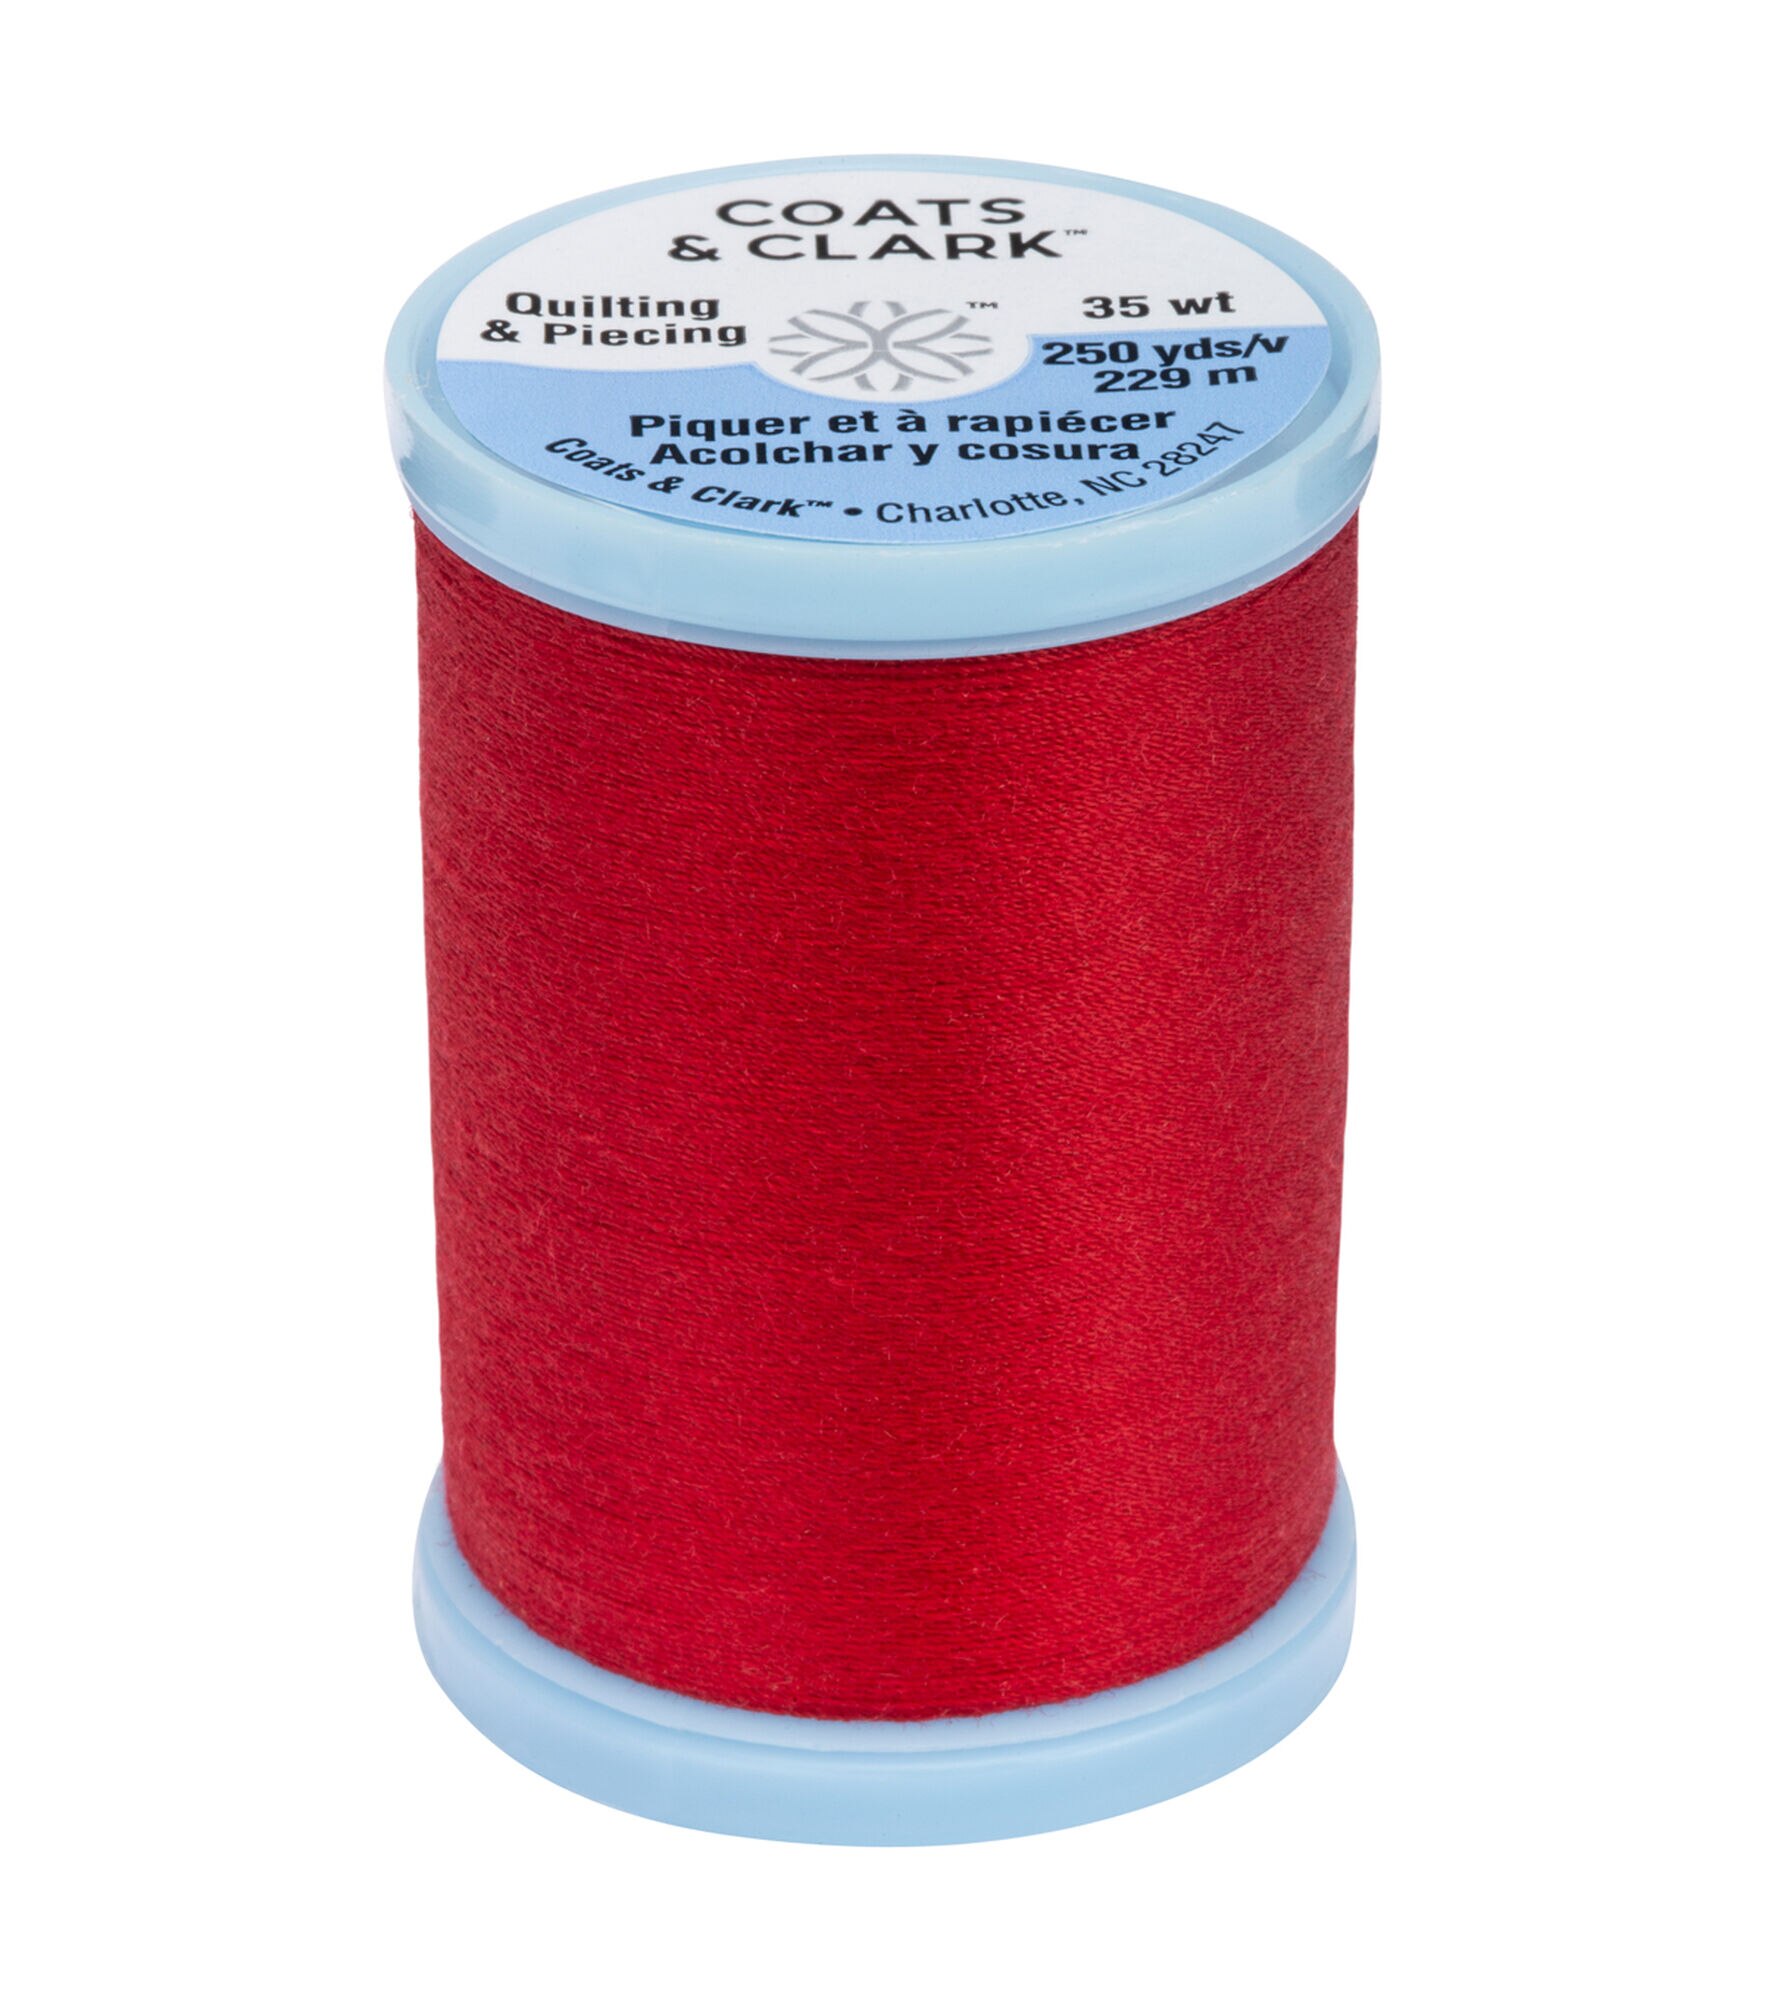 Coats & Clark 250yd 35wt Covered Quilting & Piecing Cotton Thread, 2250 Red, hi-res